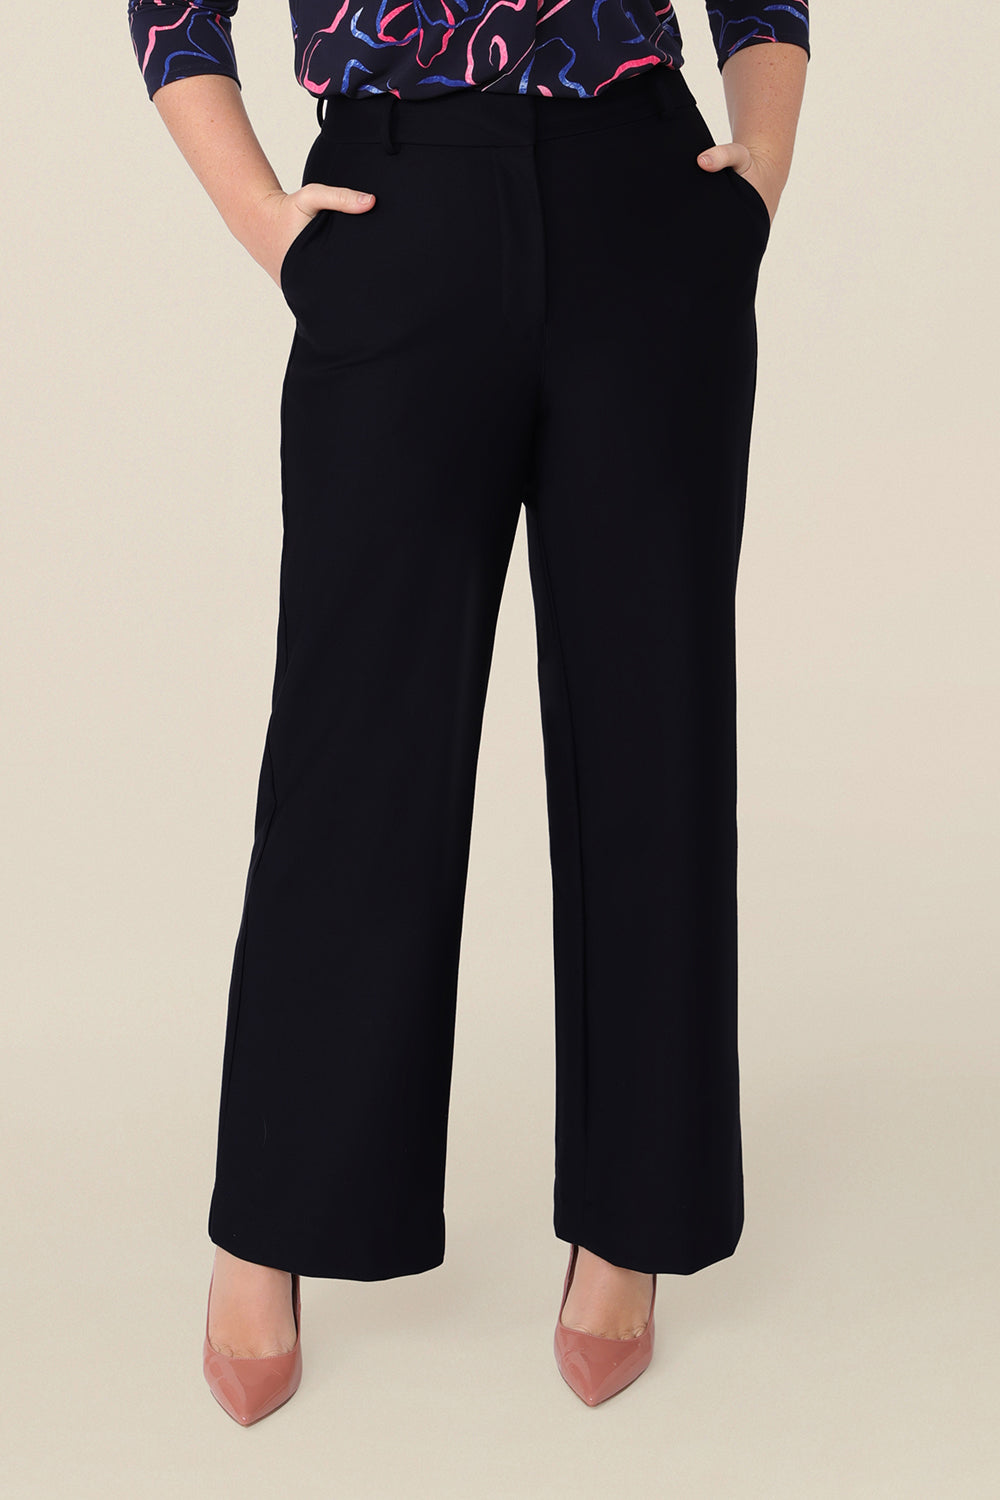 Great workwear trousers, these wide leg, tailored pants in Navy are shown in a size 12 and are styled for easy office style. Australian made by Australian and New Zealand women's pants experts,L&F, these easy-care pants are comfortable for work and corporate wear.